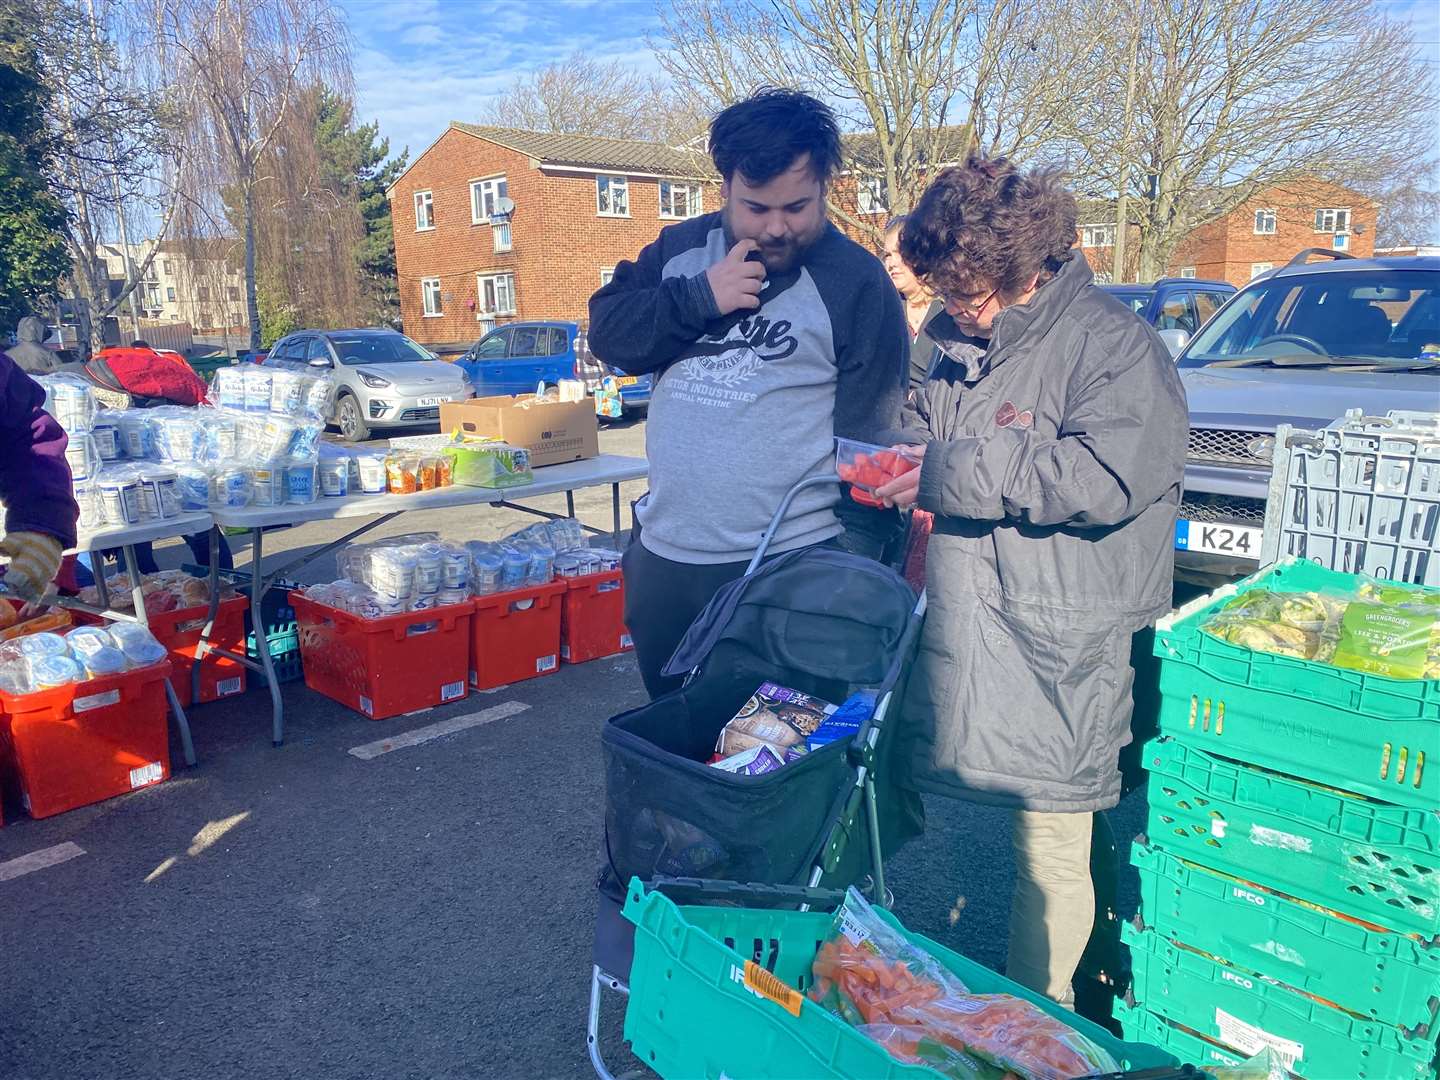 The queue for the food bank can sometimes take up to 45-minutes